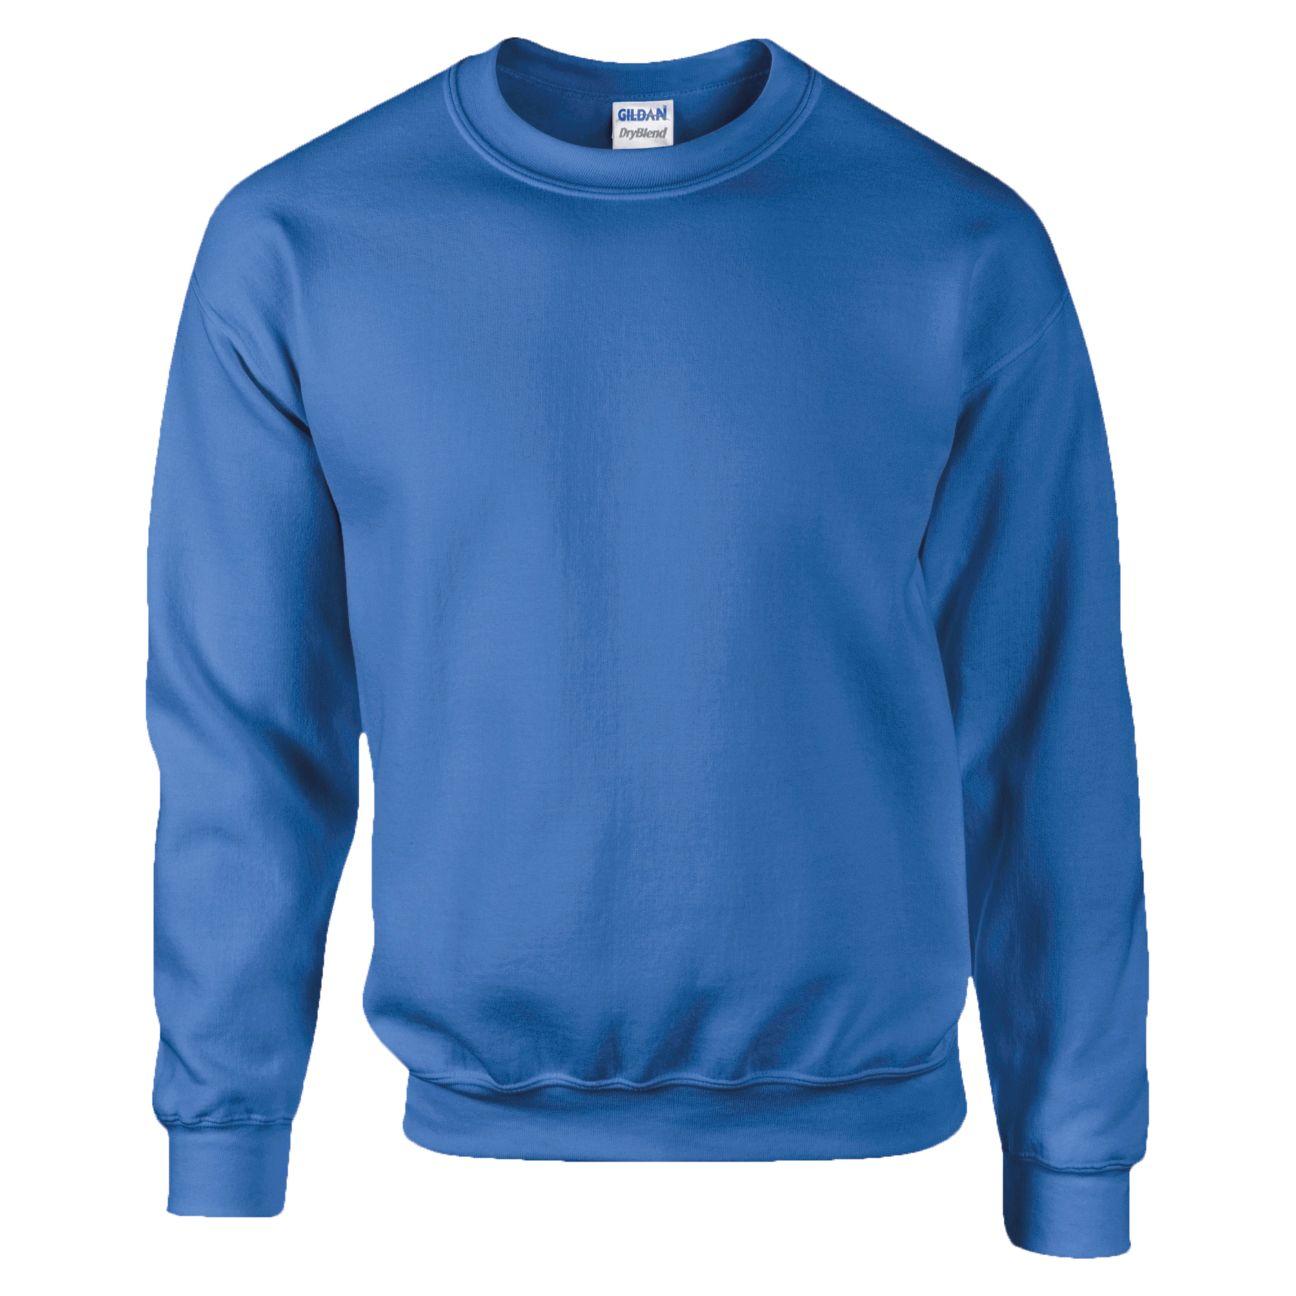 GD52 Gildan DryBlend® SweatshirtL can have your logo embroidered or printed